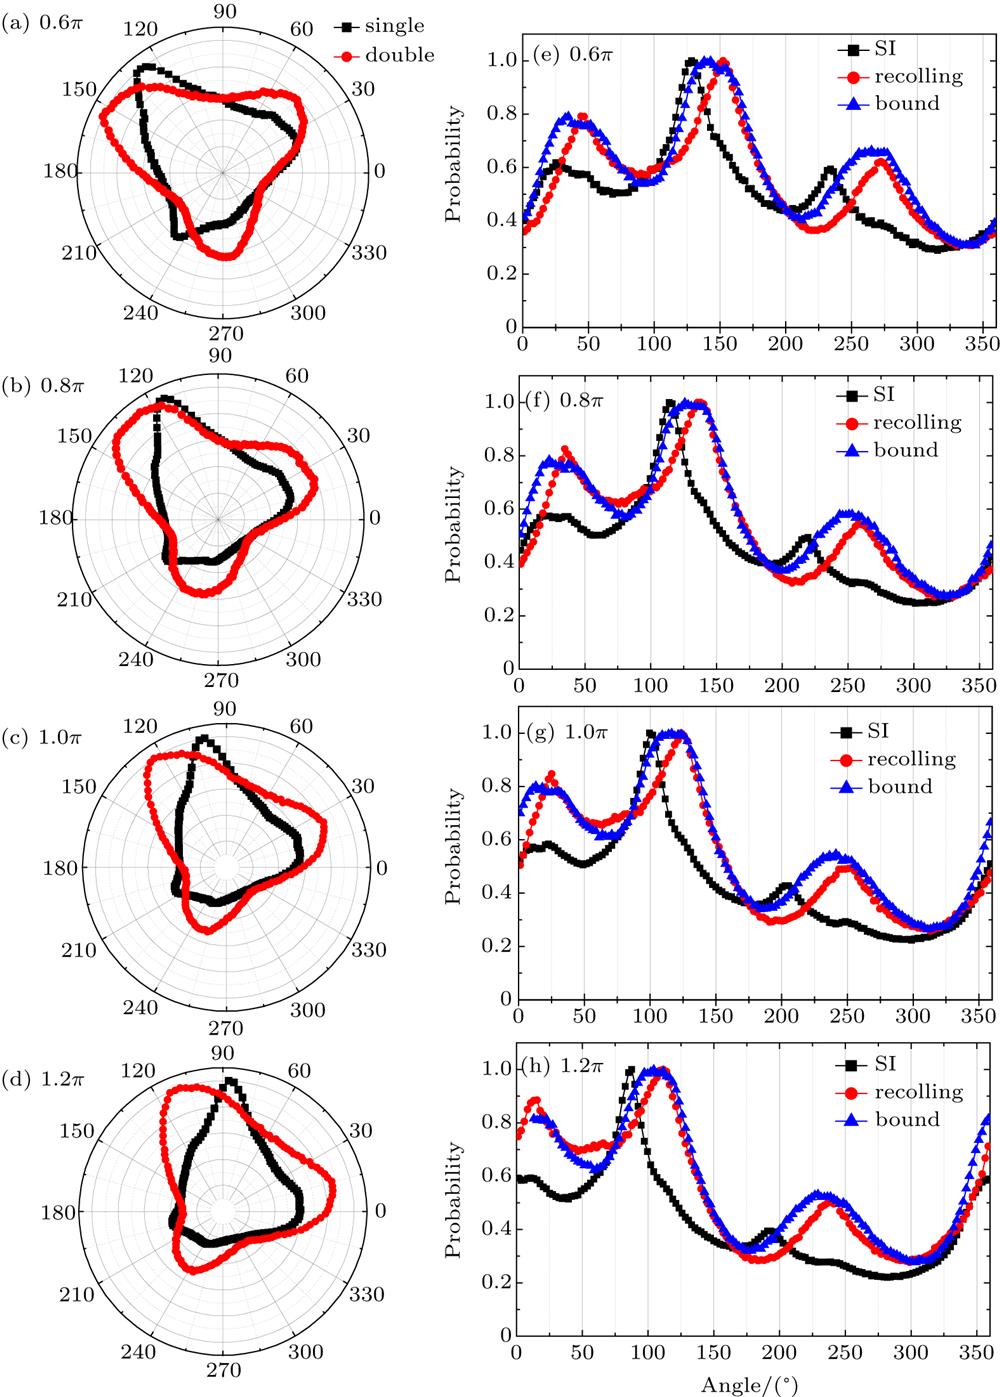 The releasing angle distributions of the electrons for the SI (black squares) and the NSDI events (red dots) for the case of Δφ = 0.6π (a), 0.8π (b), 1.0π (c), and 1.2π (d) in counter-rotating TCCP fields, respectively. The releasing angle distribution of the electrons for the SI events (black squares), the recolliding (red dots) and the bound electrons (blue triangles) in NSDI for the case of Δφ = 0.6π (e), 0.8π (f), 1.0π (g), and 1.2π (h). The combined intensity of the laser field is 0.05 PW/cm2.